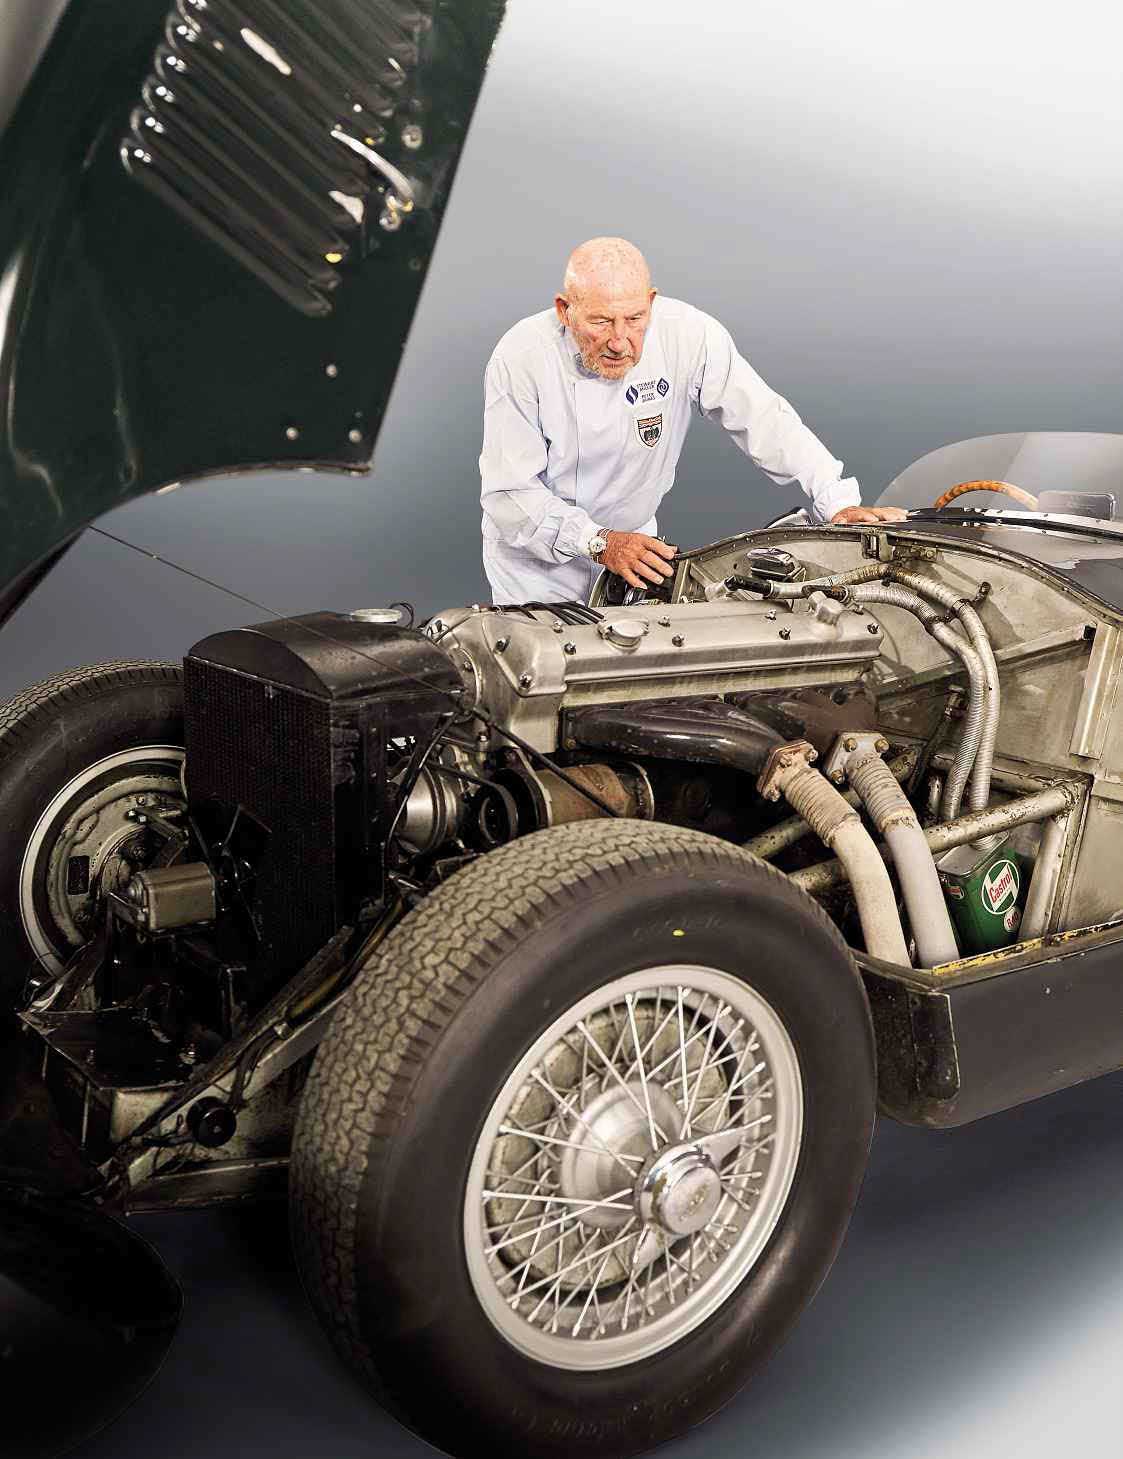 Stirling Moss and the 1953 Jaguar C-Type